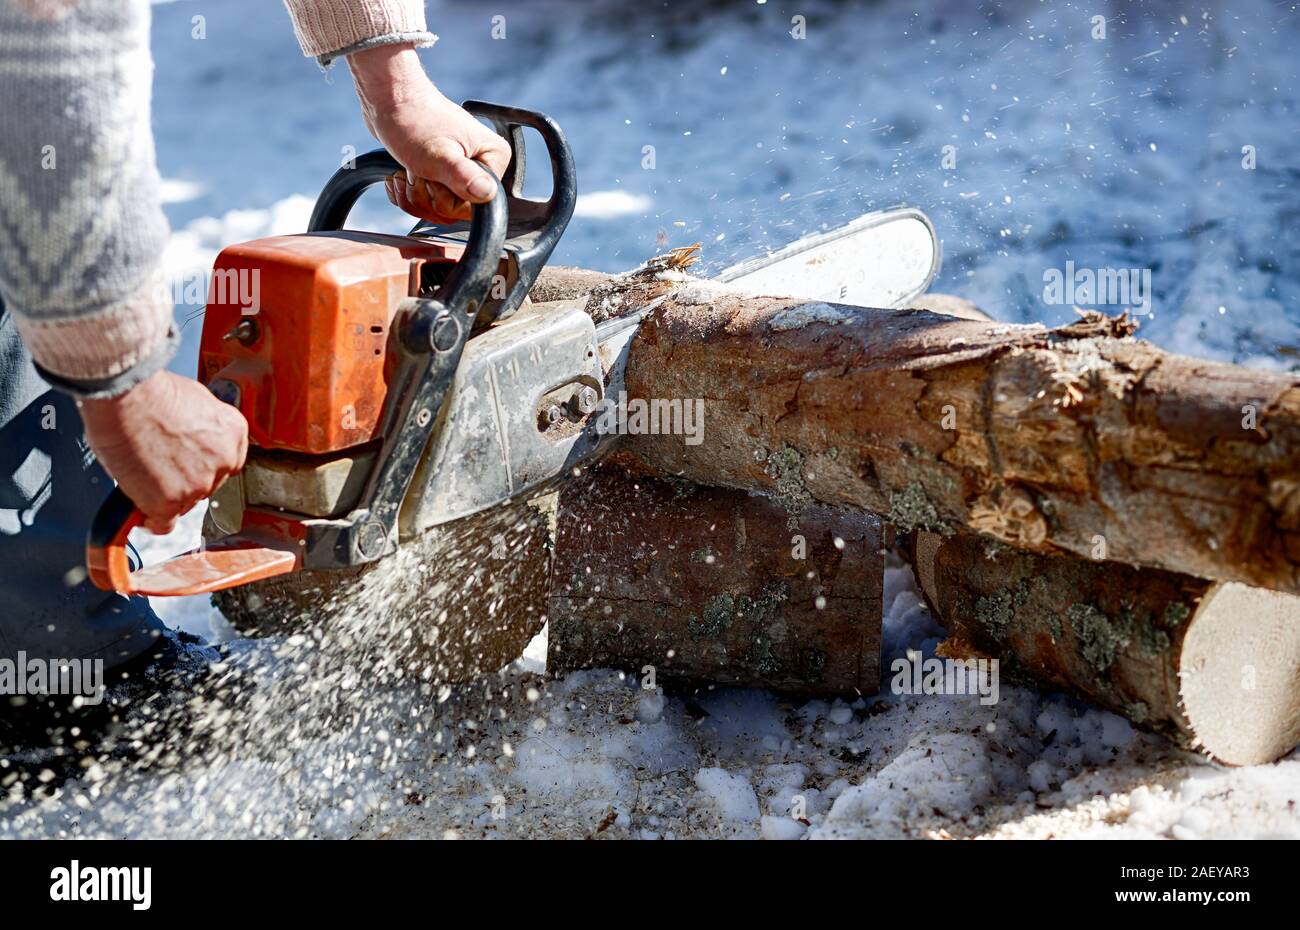 Illegal logging in Romania: Worker trimming wood with chainsaw during winter. Deforestation concept Stock Photo